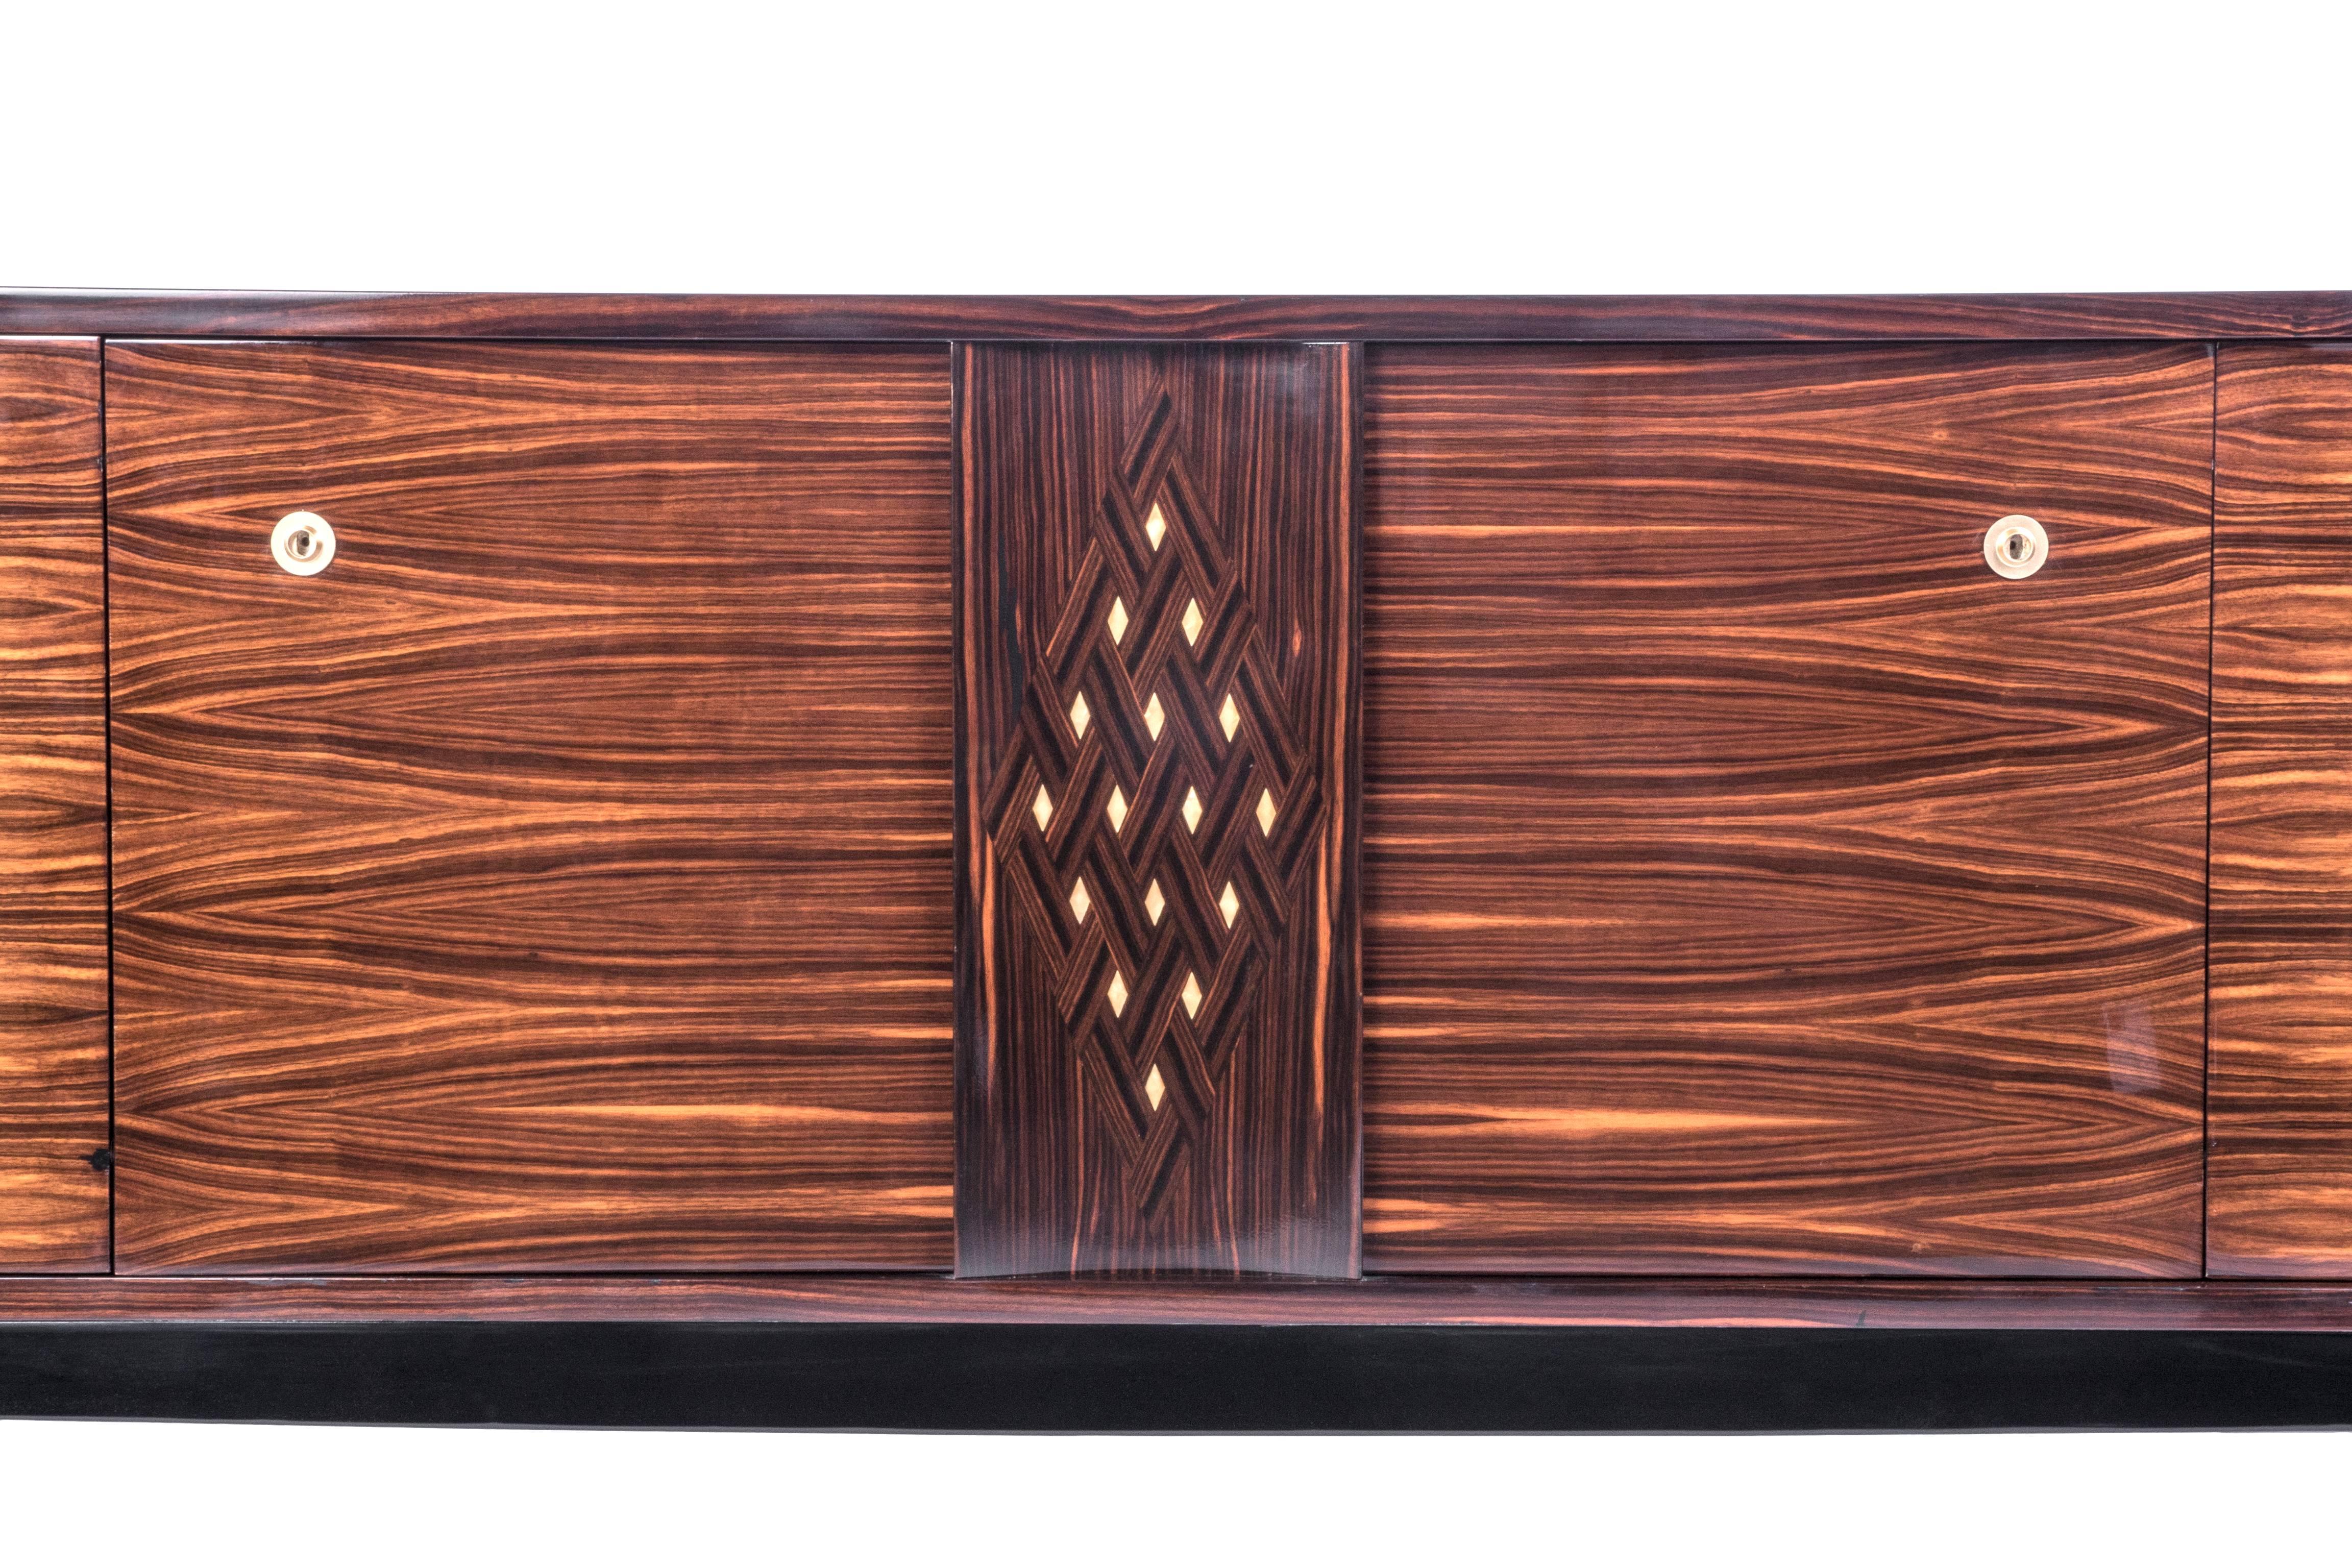 Rare French Art Deco in blonde Macassar ebony veneered mahogany buffet / sideboard with interiors in sycamore. The pieces have a geometric design inlaid on the center panel what gives it a modern feel.